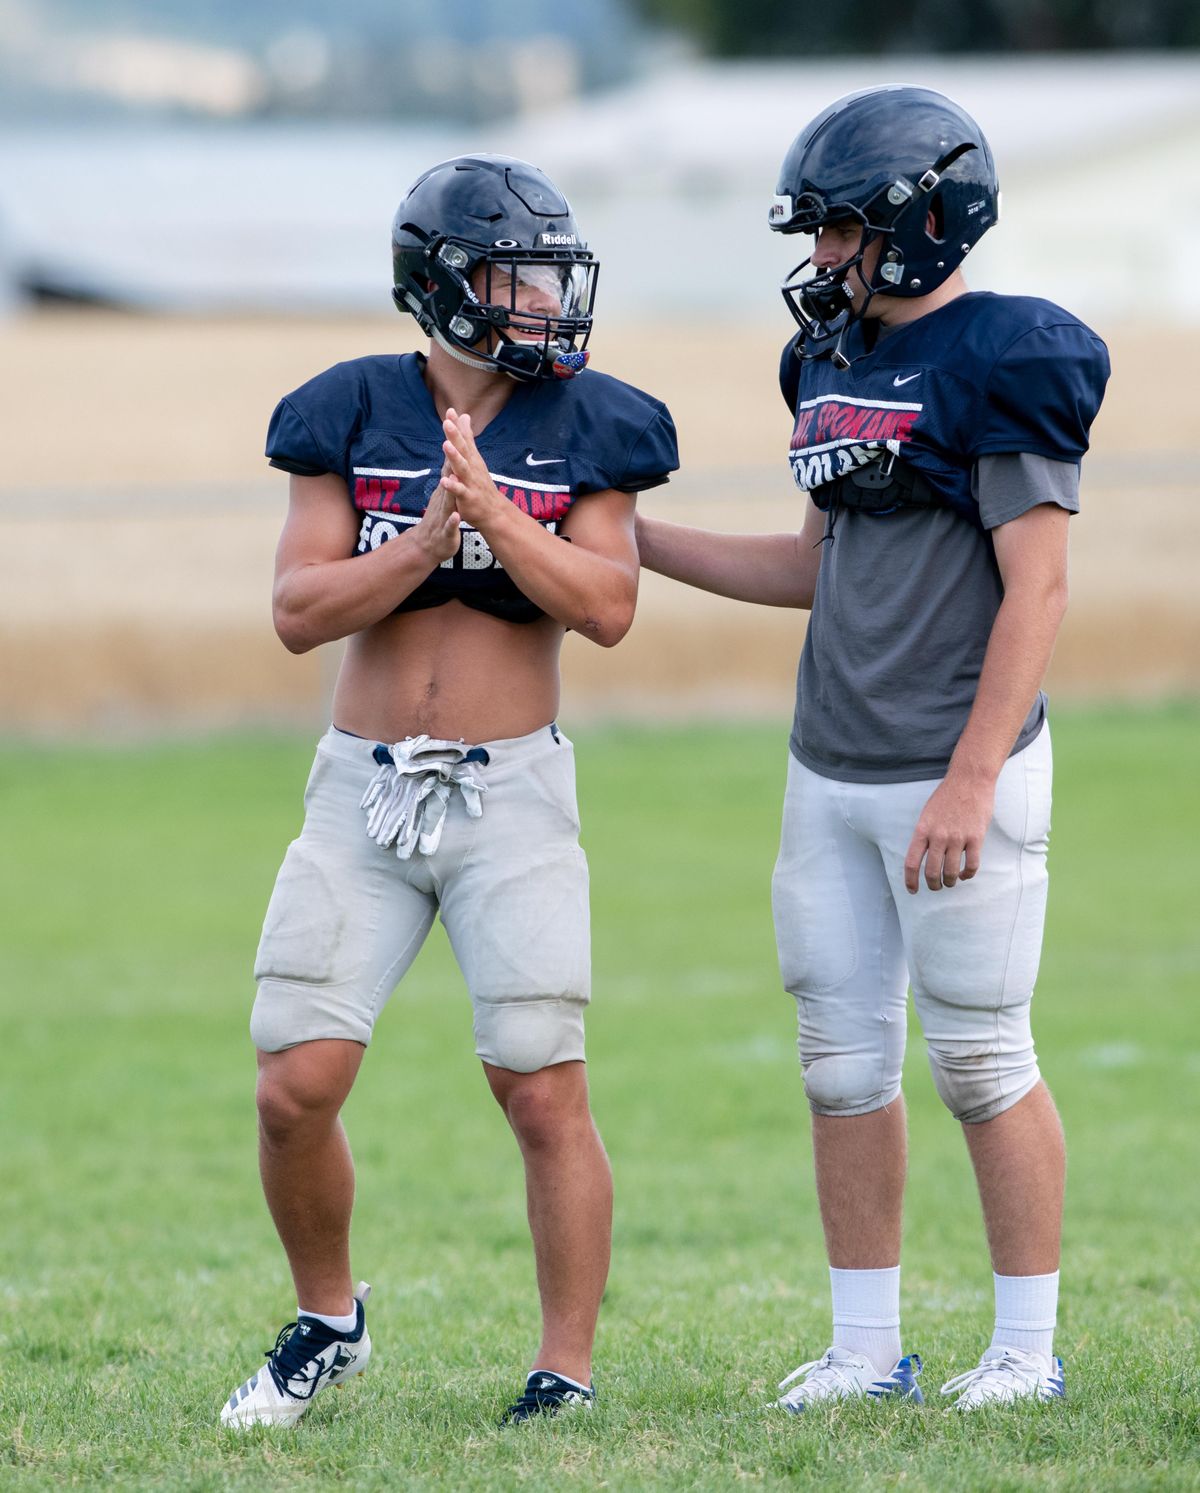 Slotback Kannon Katzer, left, and quarterback Jeter Schuerman, right, are shown working out at Tuesday, Sept. 3, 2019. The two are part of the talented core of the Mt. Spokane Wildcats, who play their first game against Glacier (Kalispell, MT) Friday. (Jesse Tinsley / The Spokesman-Review)